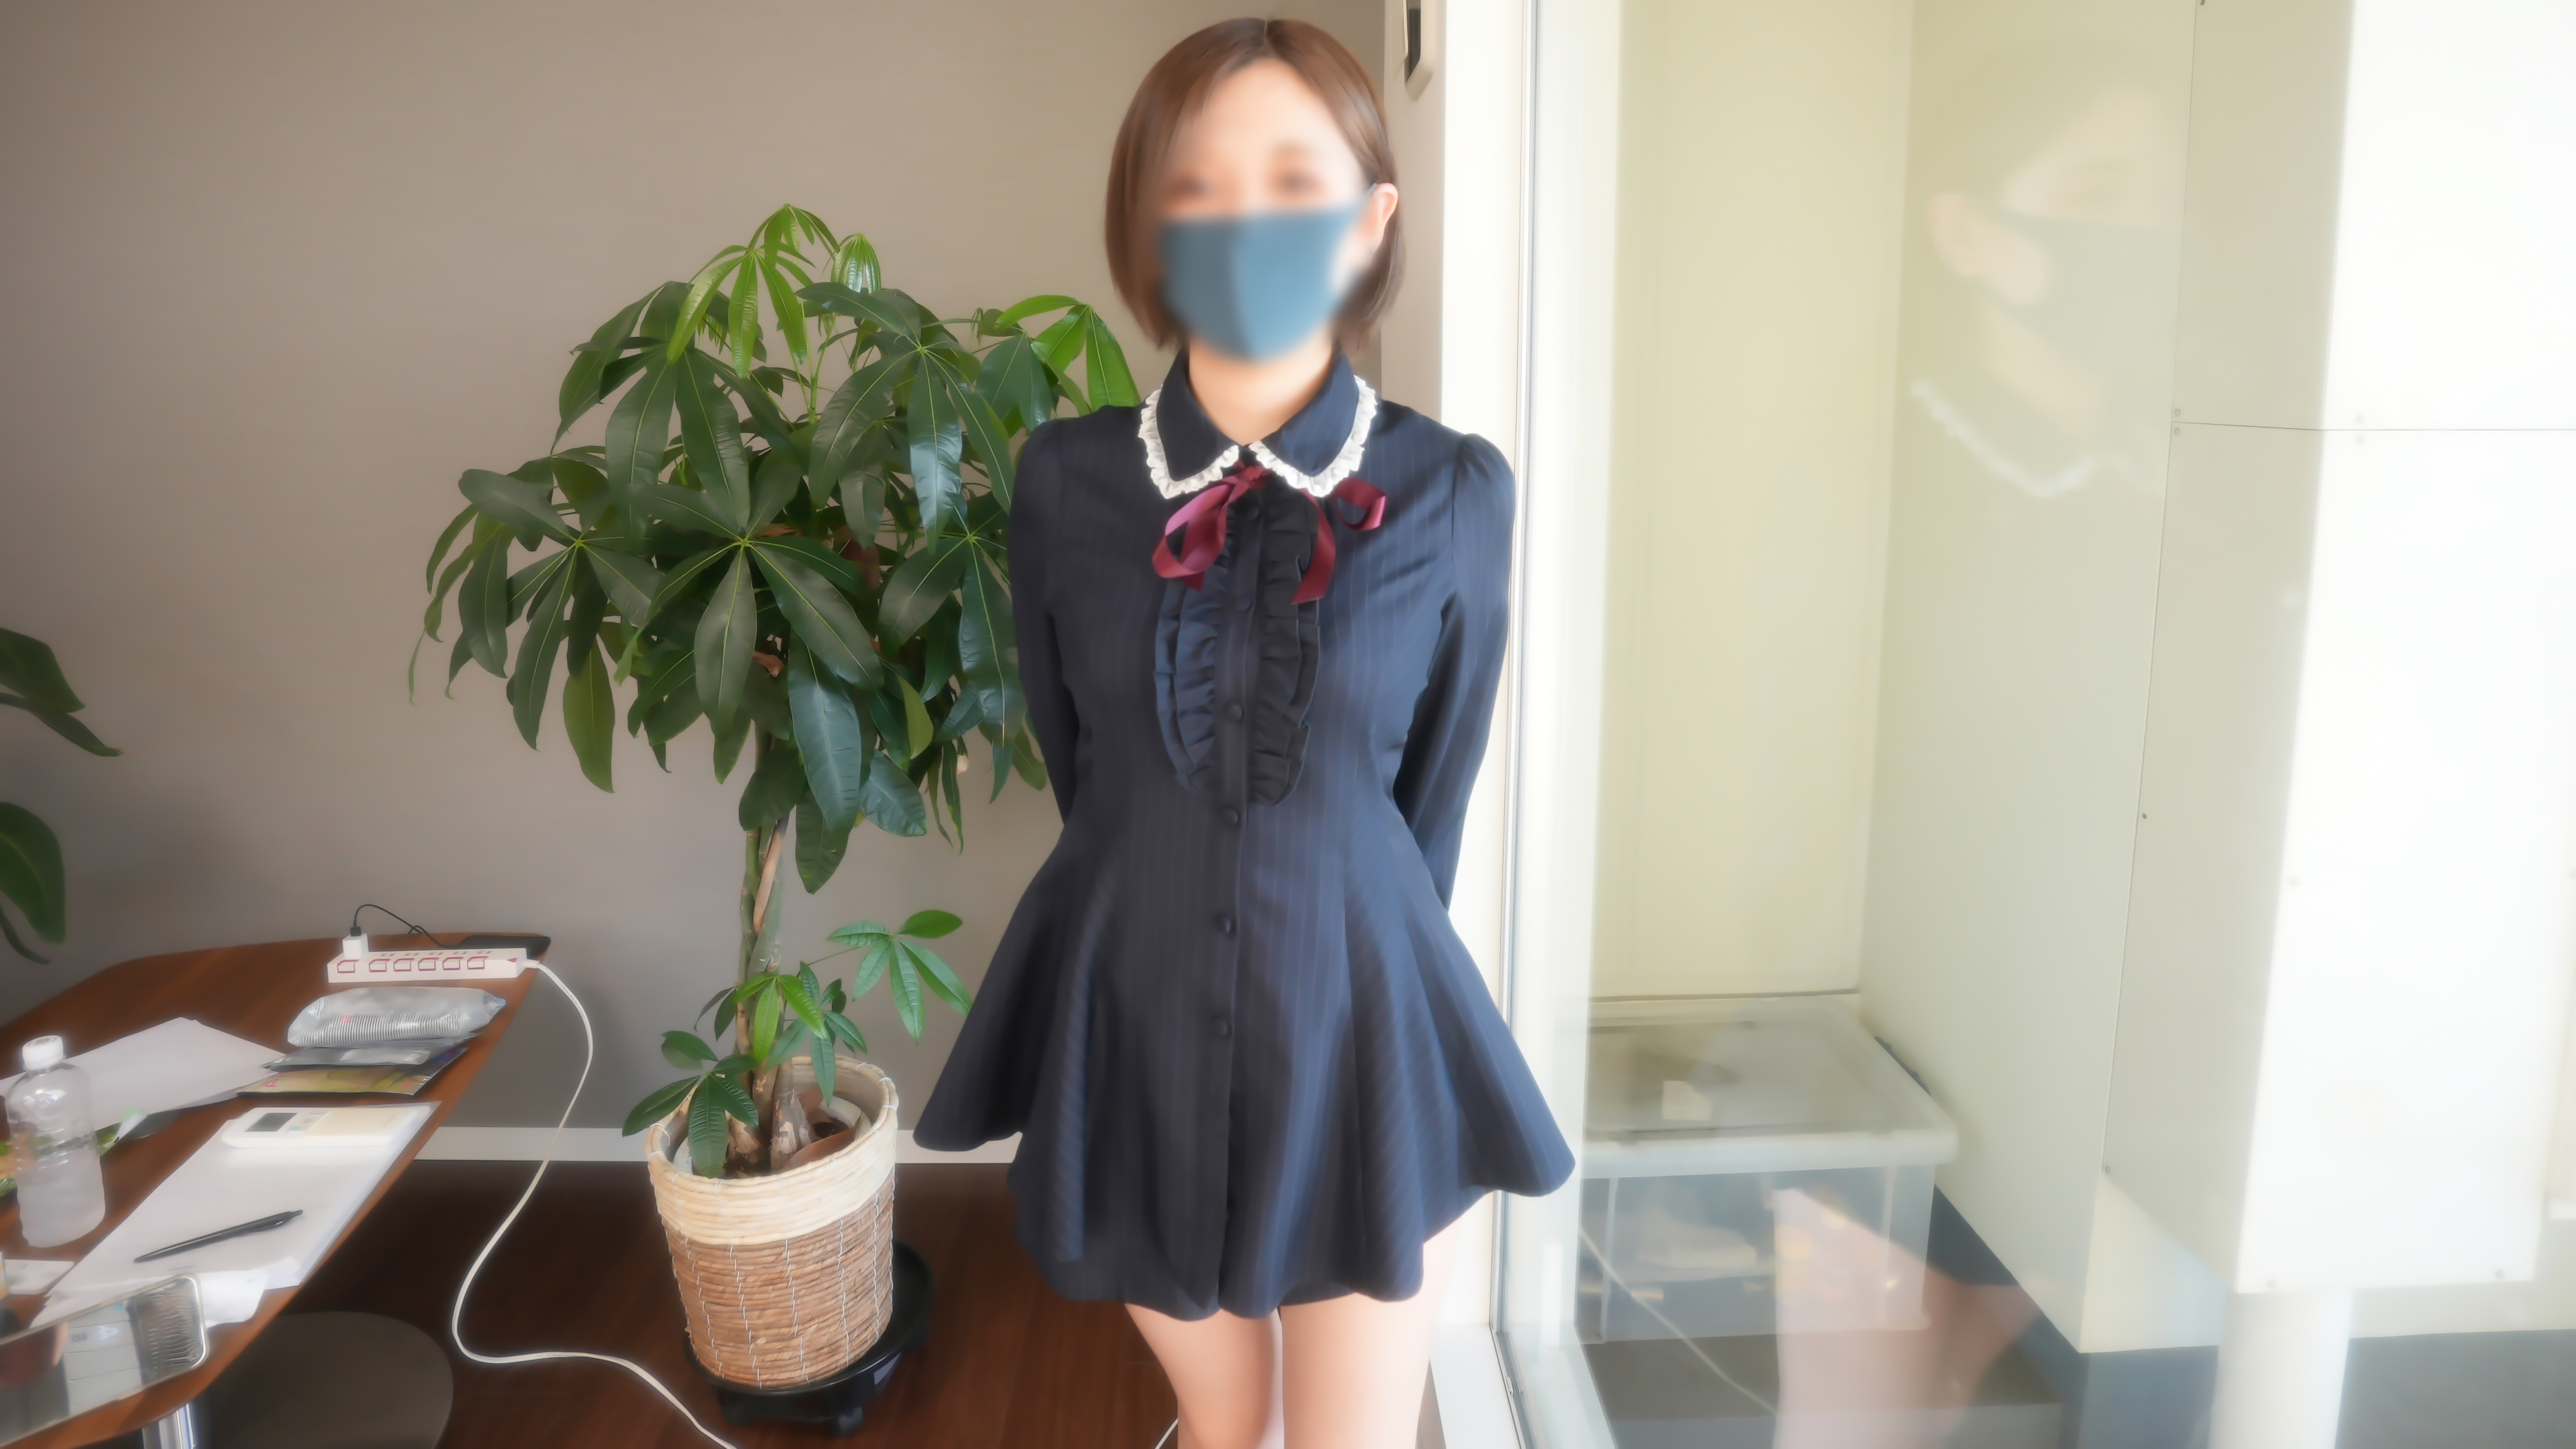 New 500 yen series 30000 channel subscribers Thank you for the first project Main part complete appearance short-cut current female college student summer-like E-cup vaginal cum shot complete first shooting 227th person